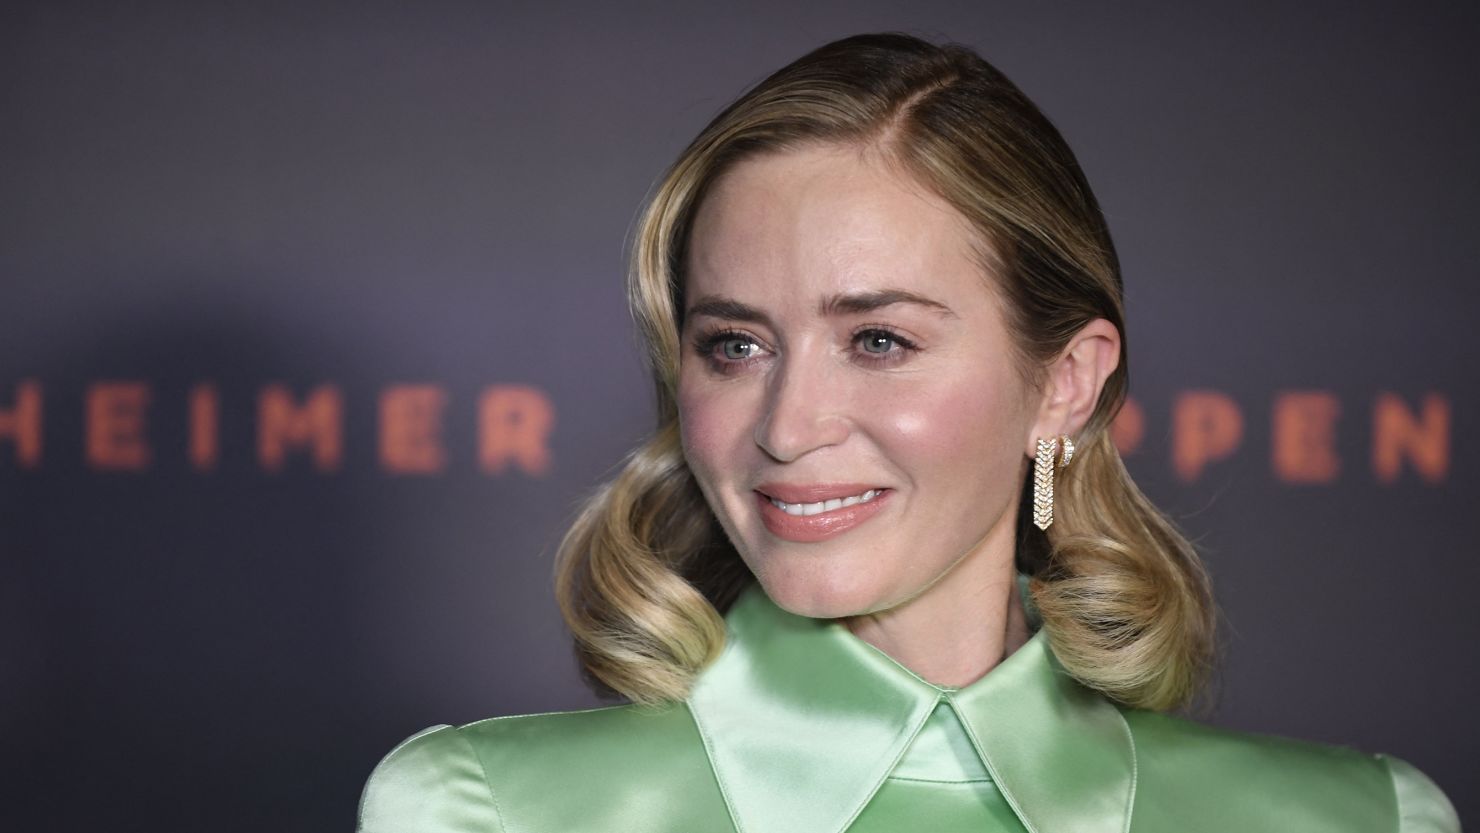 Emily Blunt will star in the film "Oppenheimer," which is set to hit box offices on July 21.